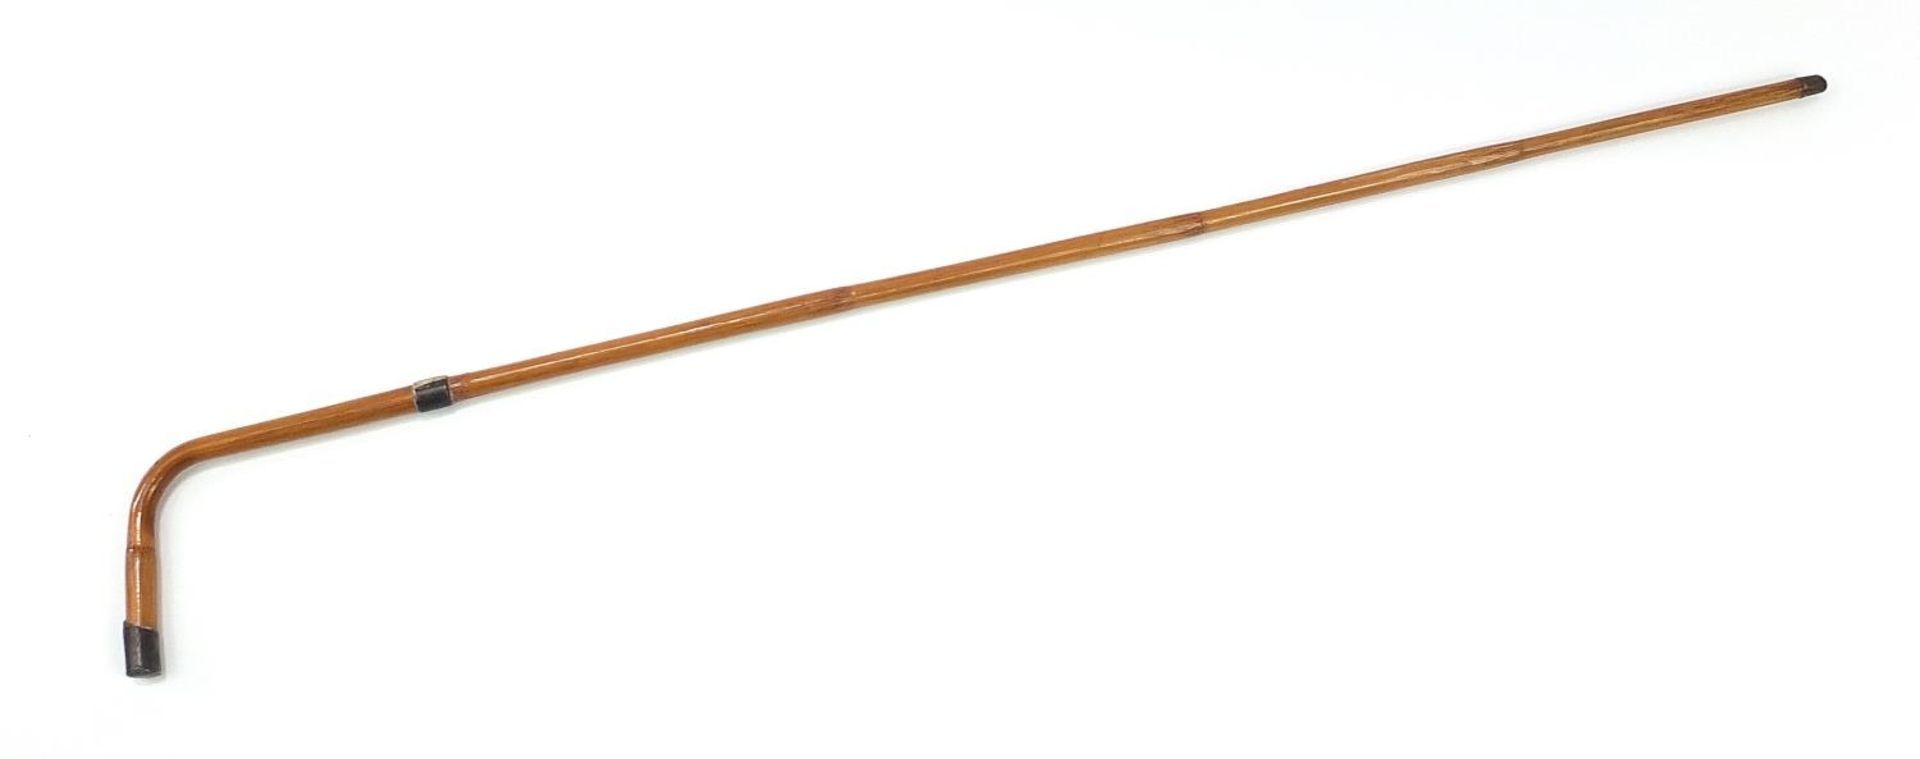 Bamboo walking stick with silver mounts, indistinct Birmingham hallmarks, 91cm in length - Image 3 of 4